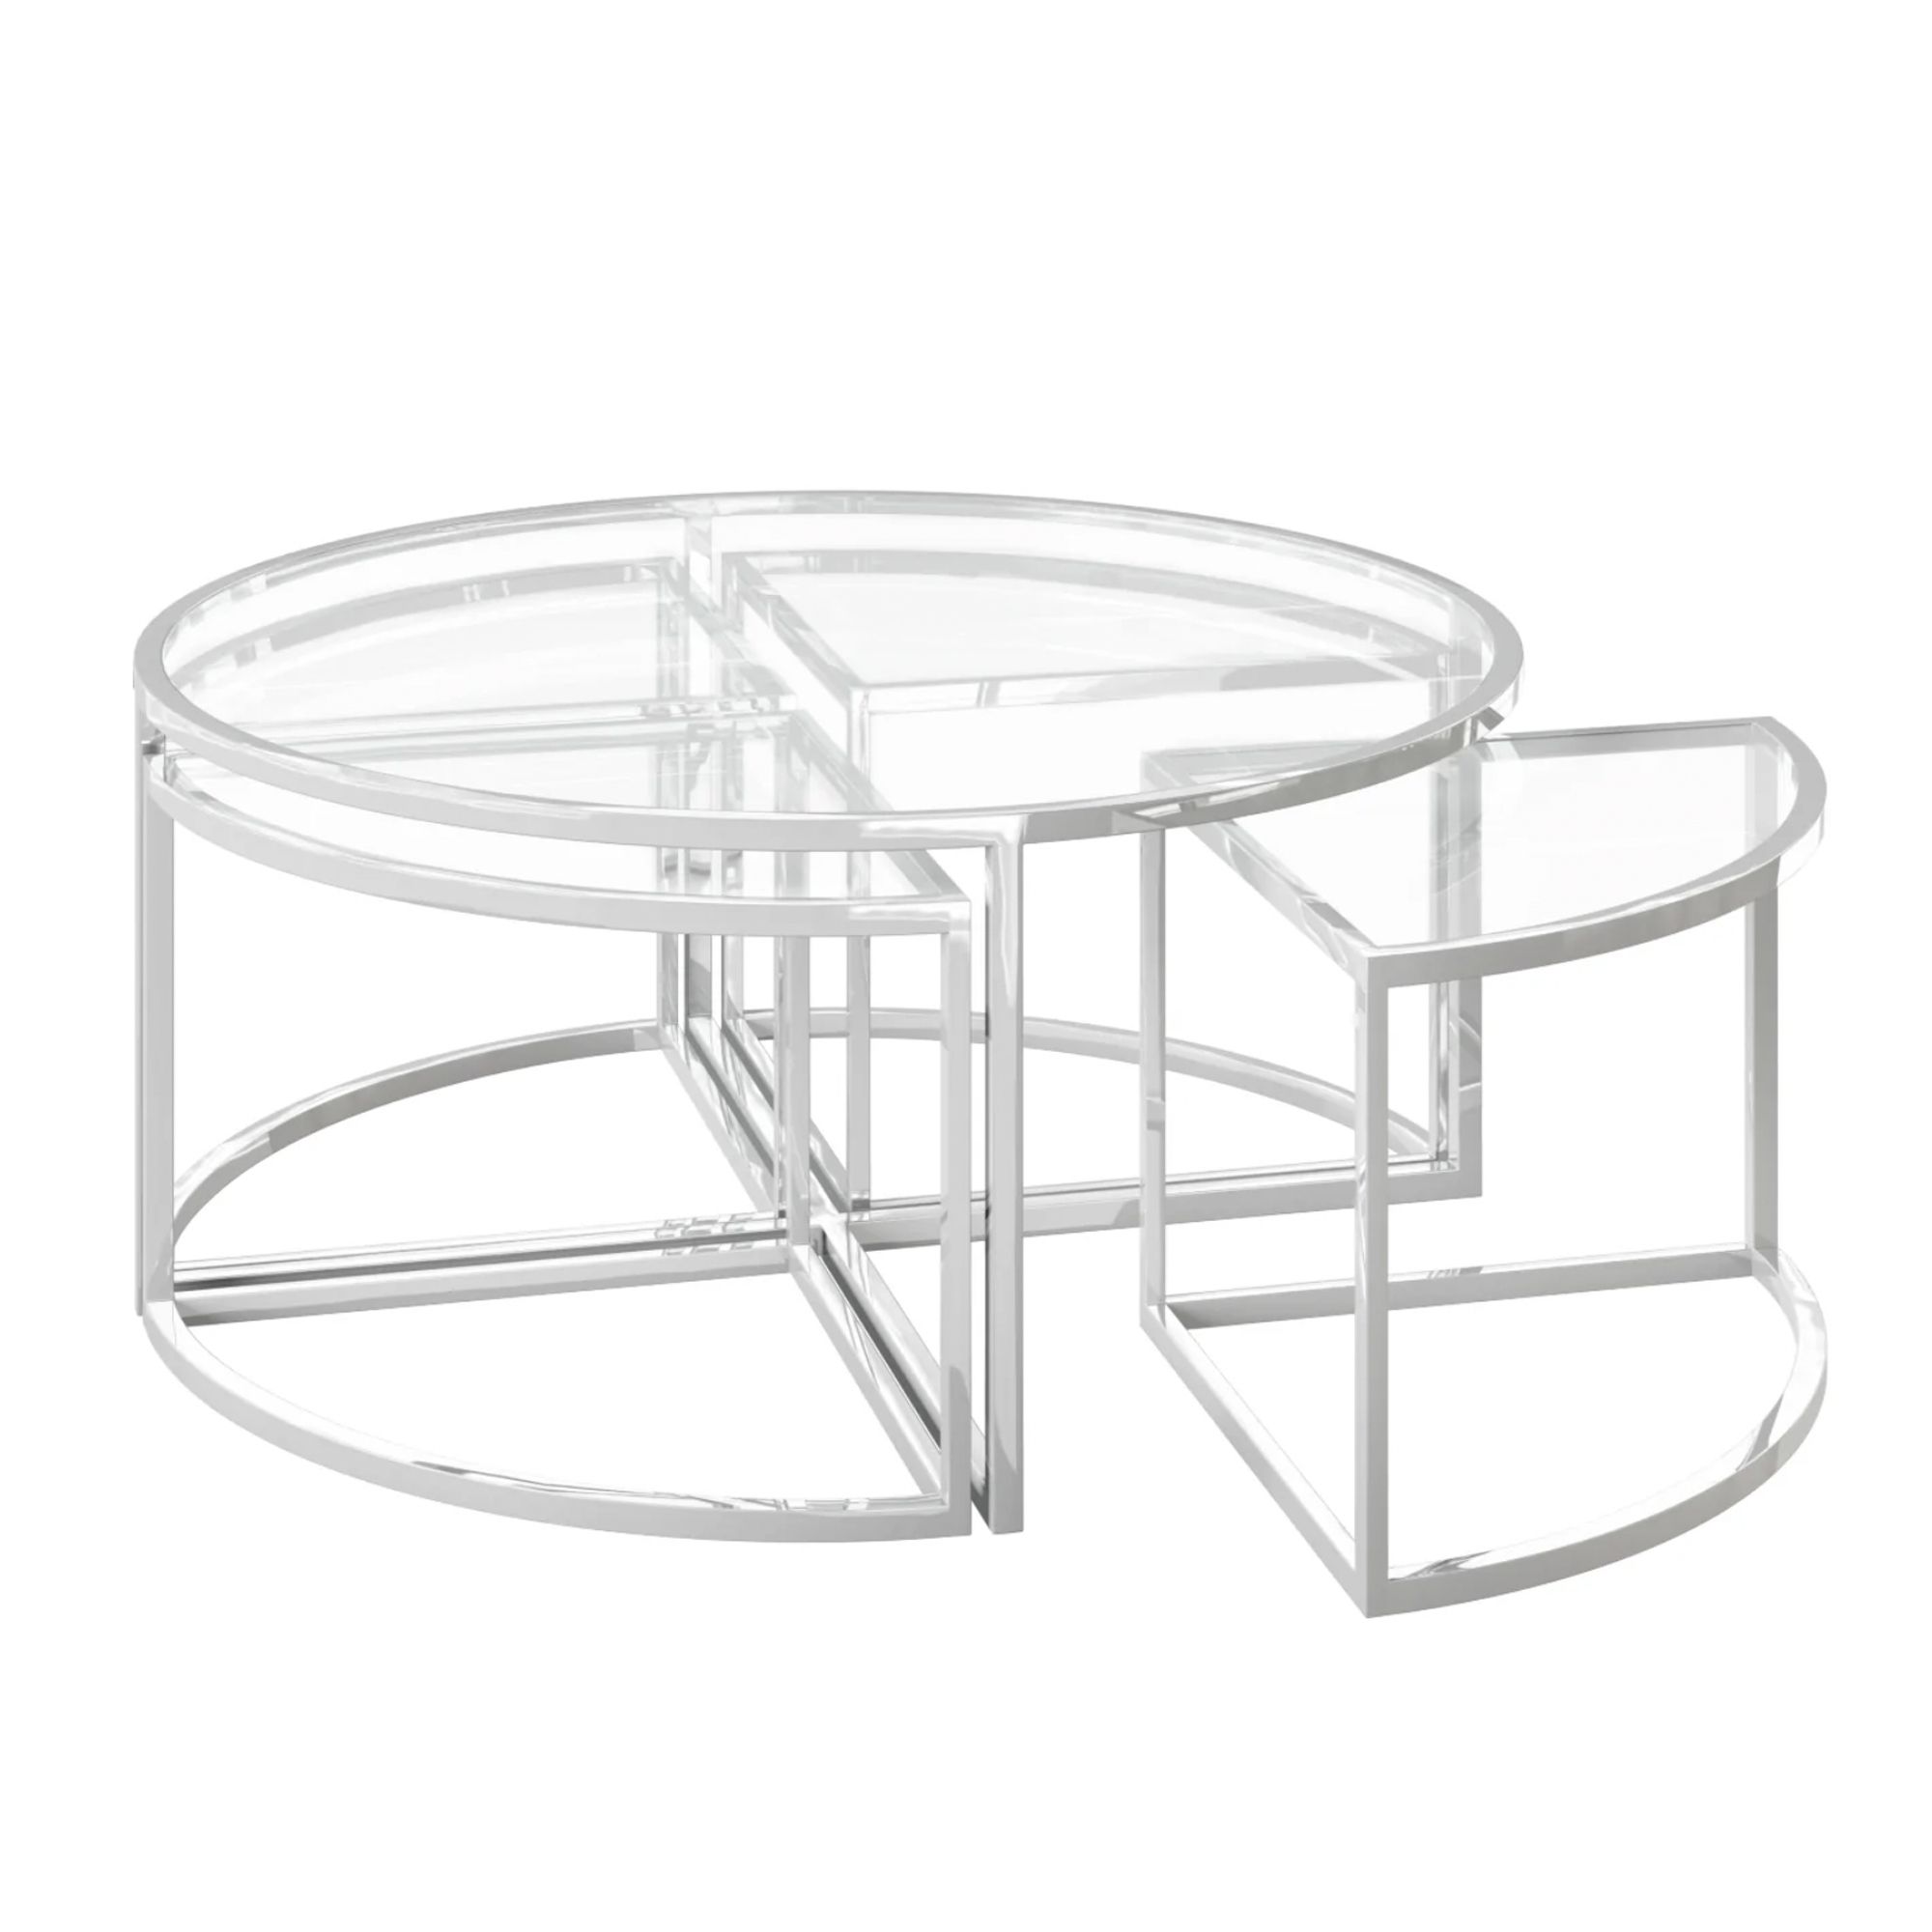 Orbit Nesting Glass Chrome Coffee Table Set – Modish Furnishing In Chrome Coffee Tables (View 12 of 20)